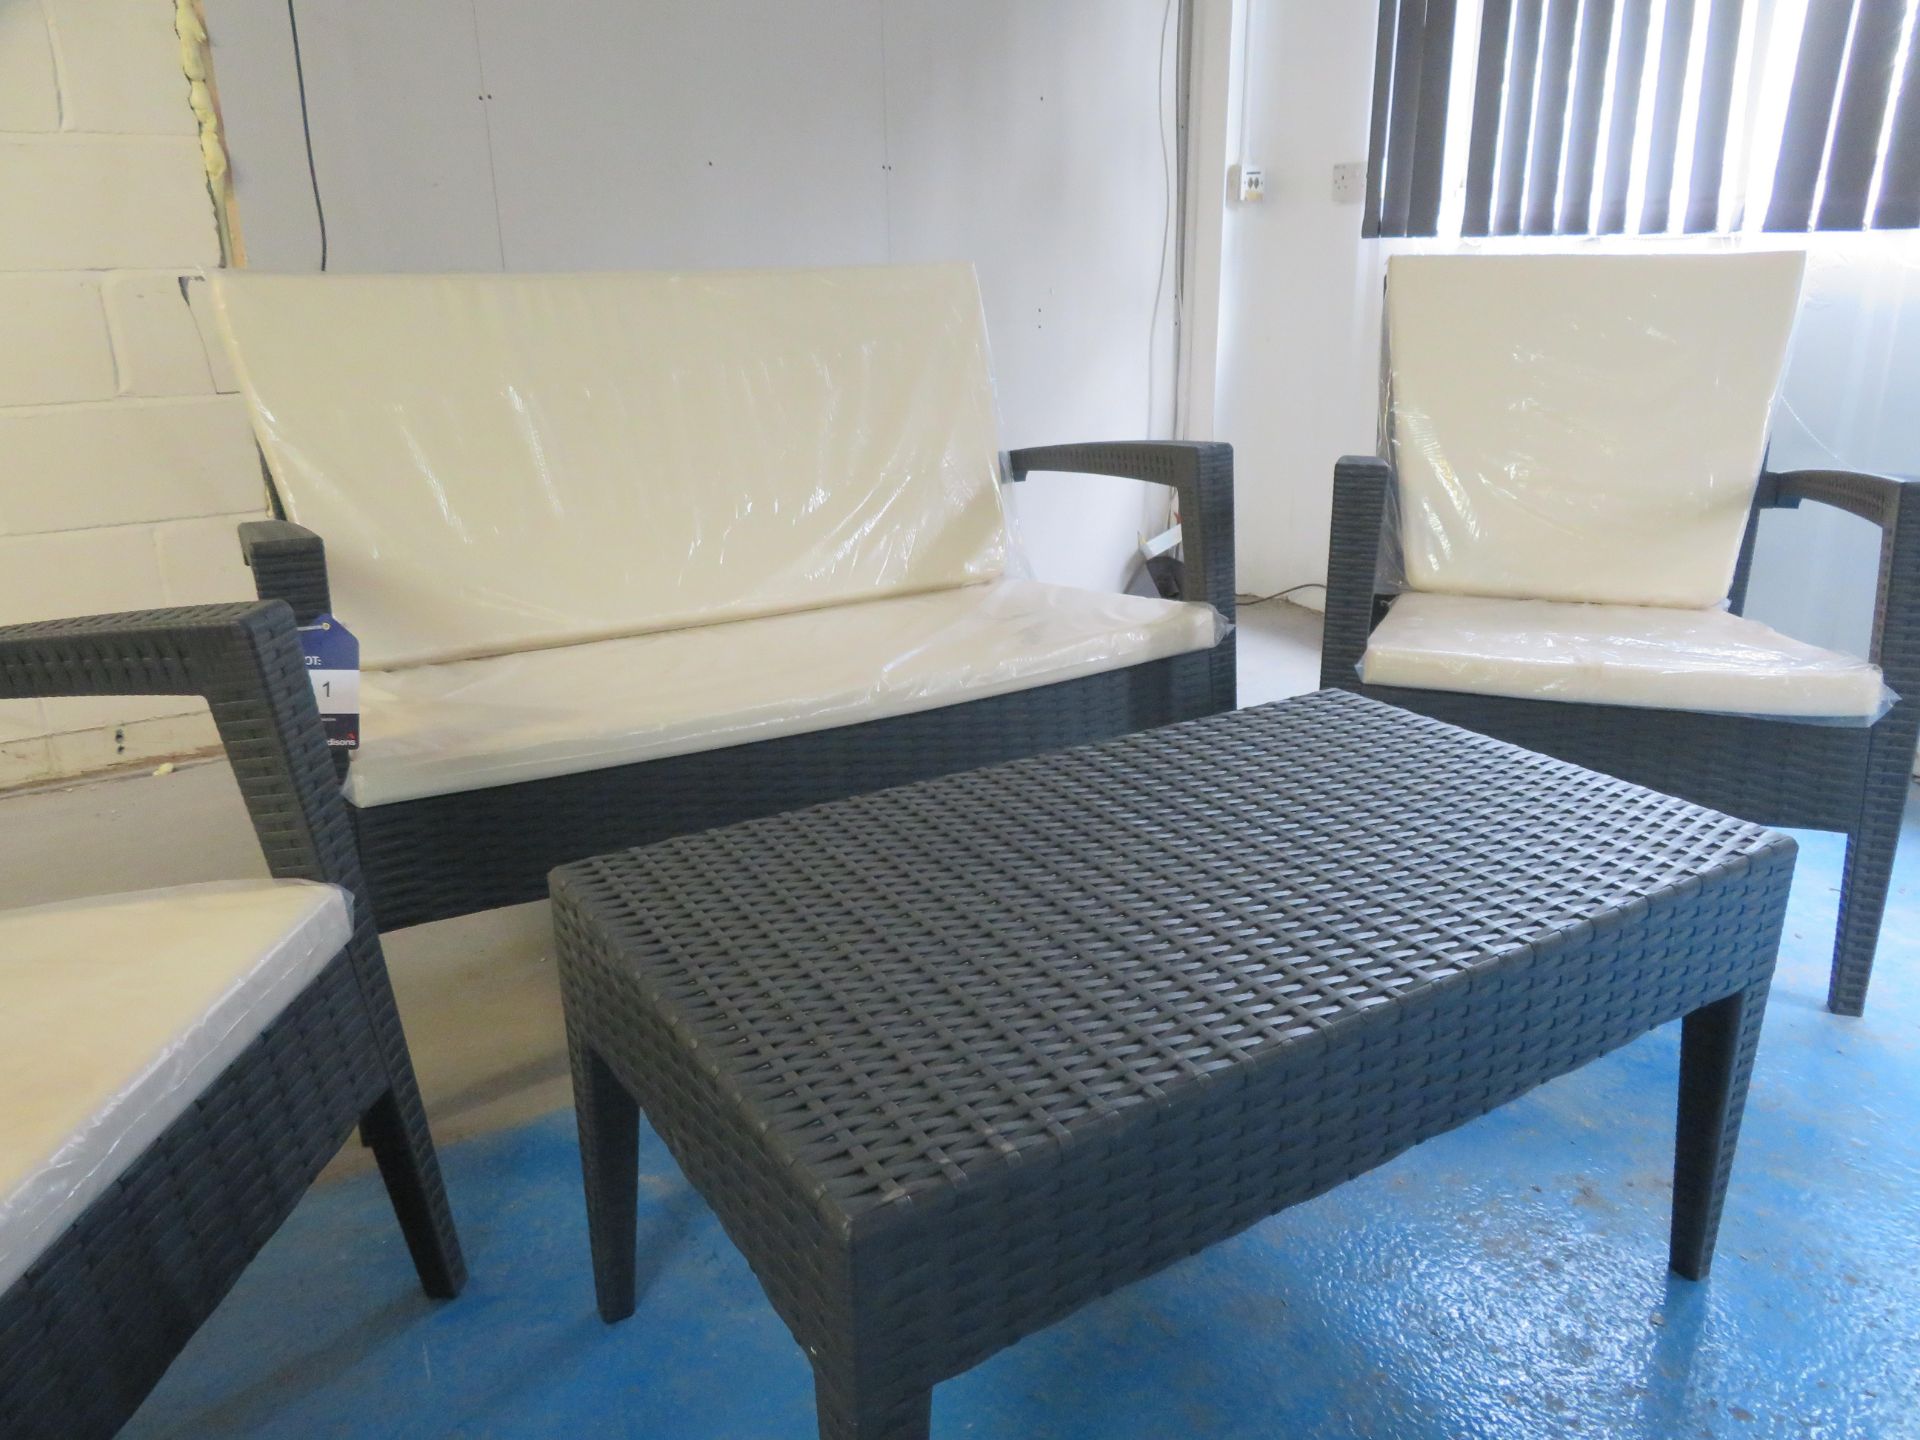 4 piece Rattan effect garden furniture set comprising 2 seater sofa, 2cm chairs and coffee table - Image 2 of 2